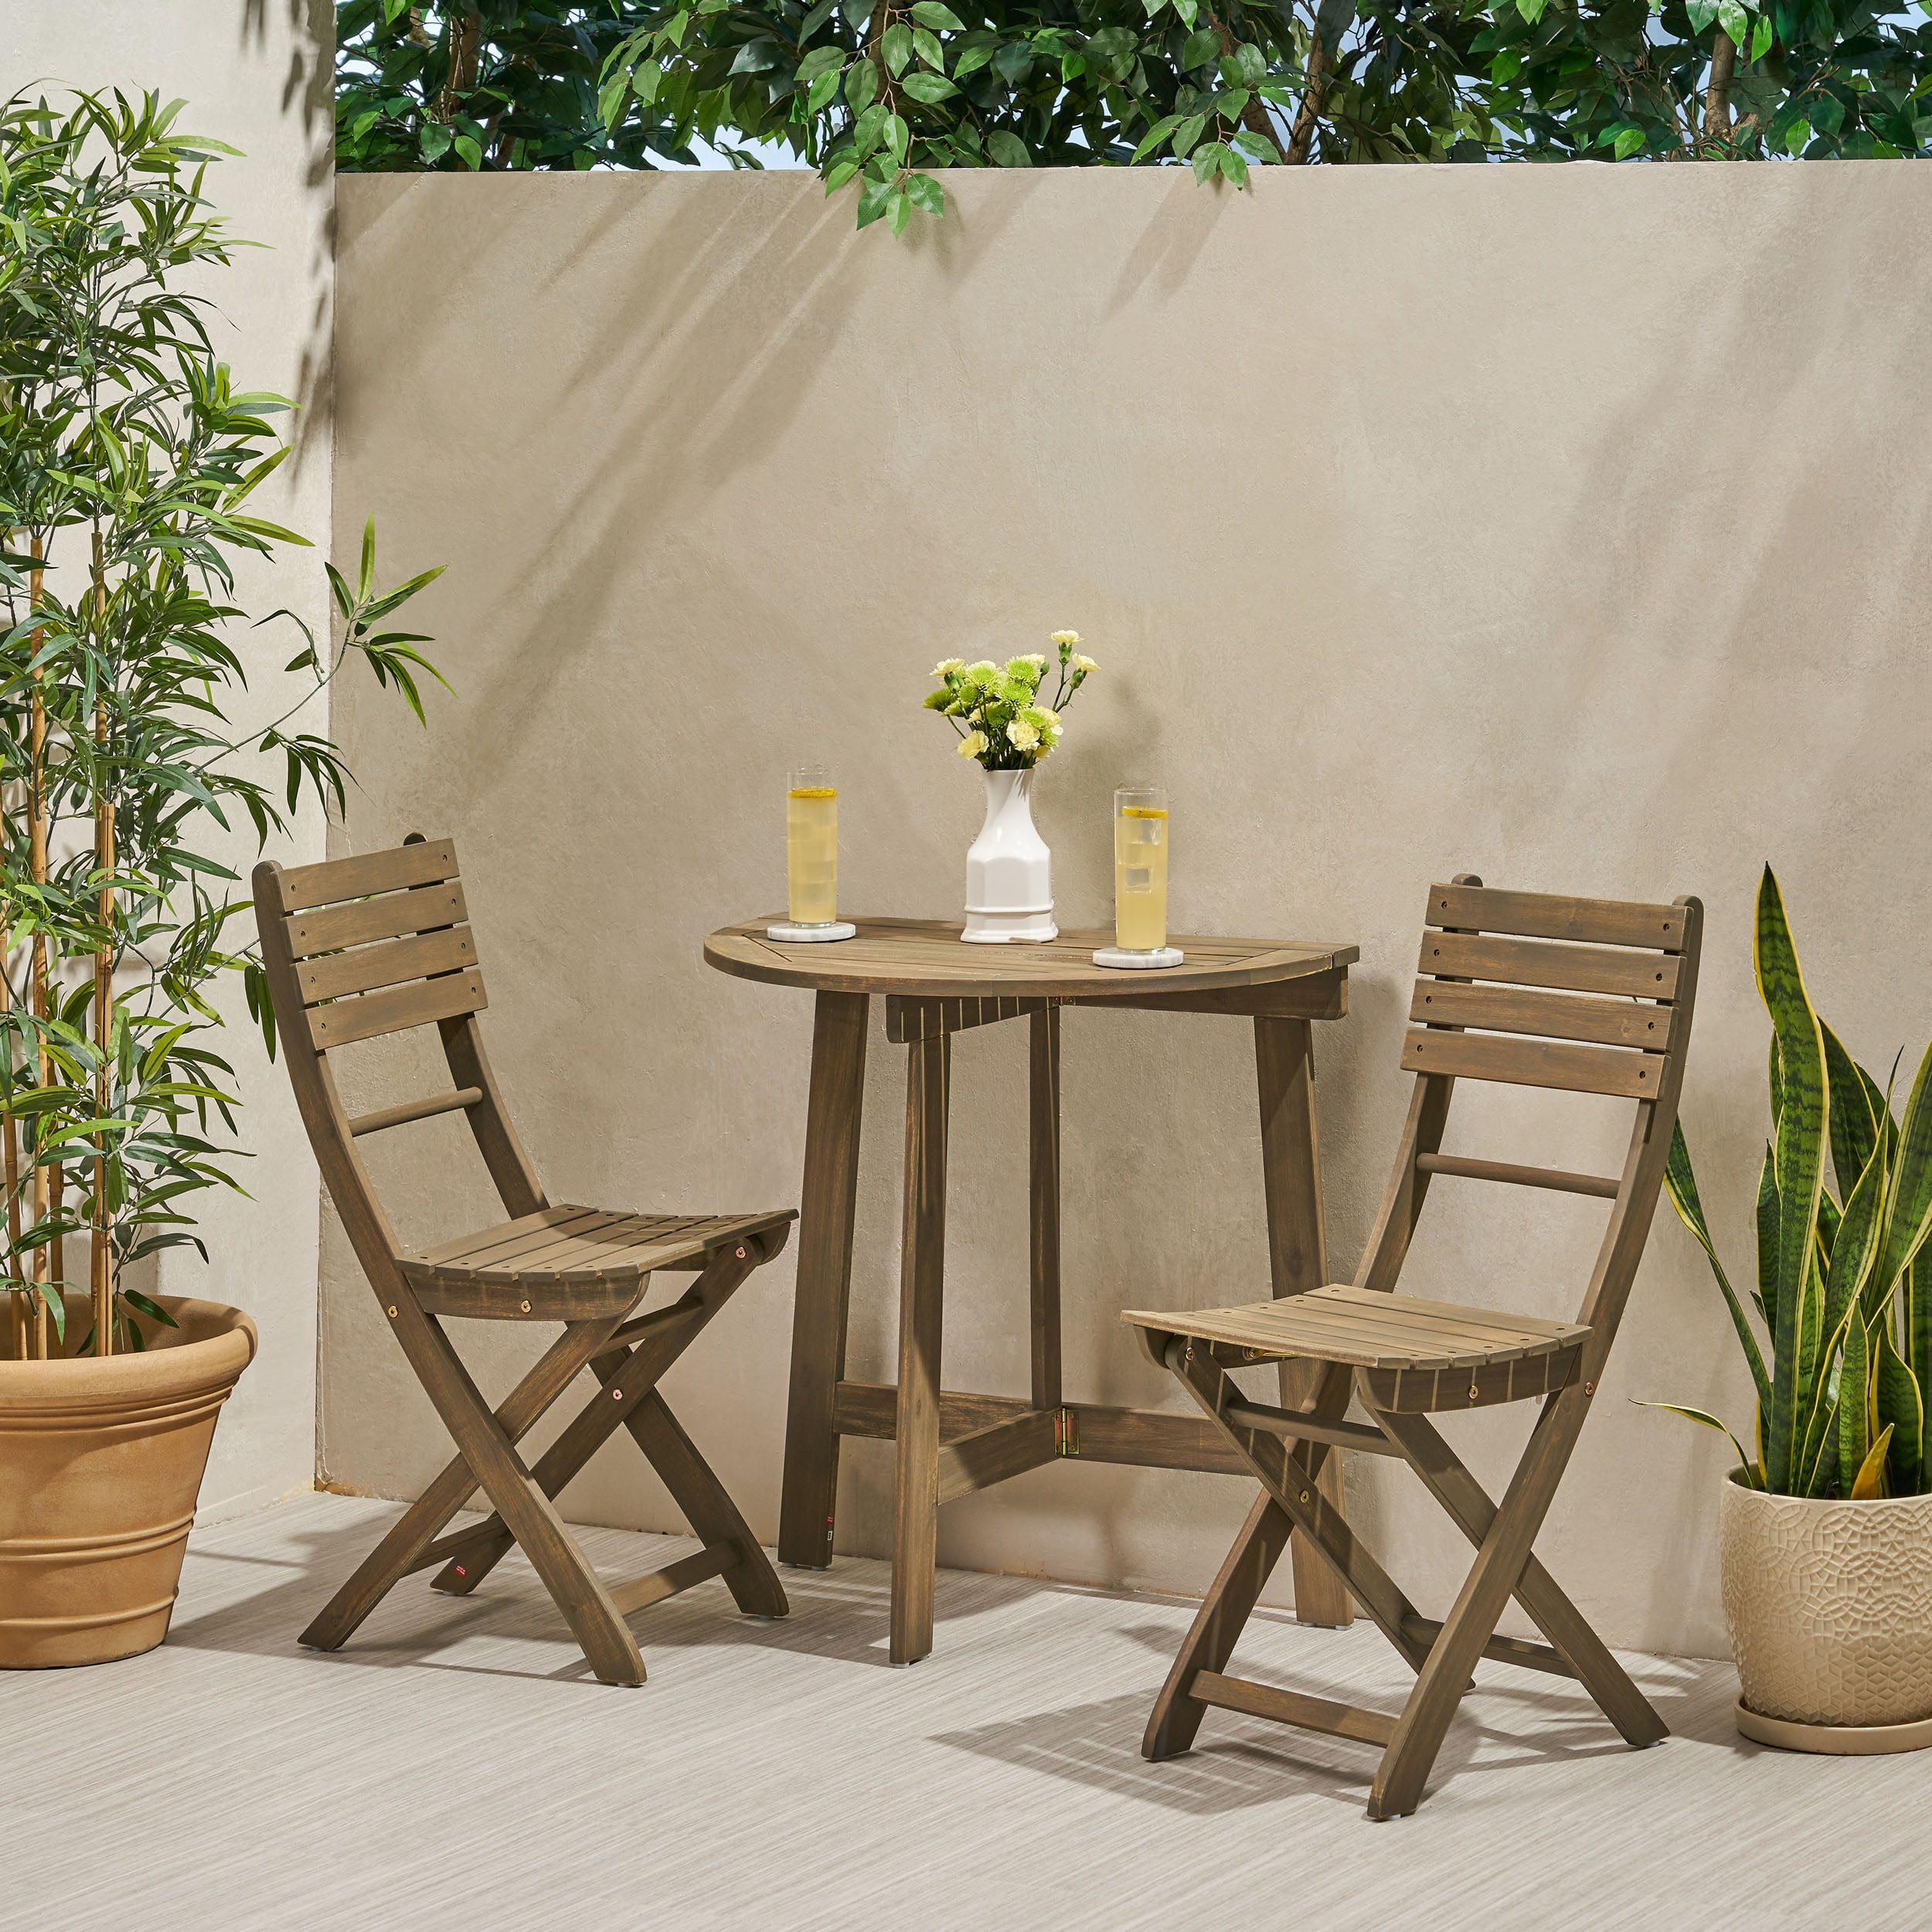 Jude Outdoor 2 Seater Half Round Folding Acacia Wood Bistro Table Set,  Natural – Walmart With Regard To Outdoor Half Round Coffee Tables (View 6 of 15)